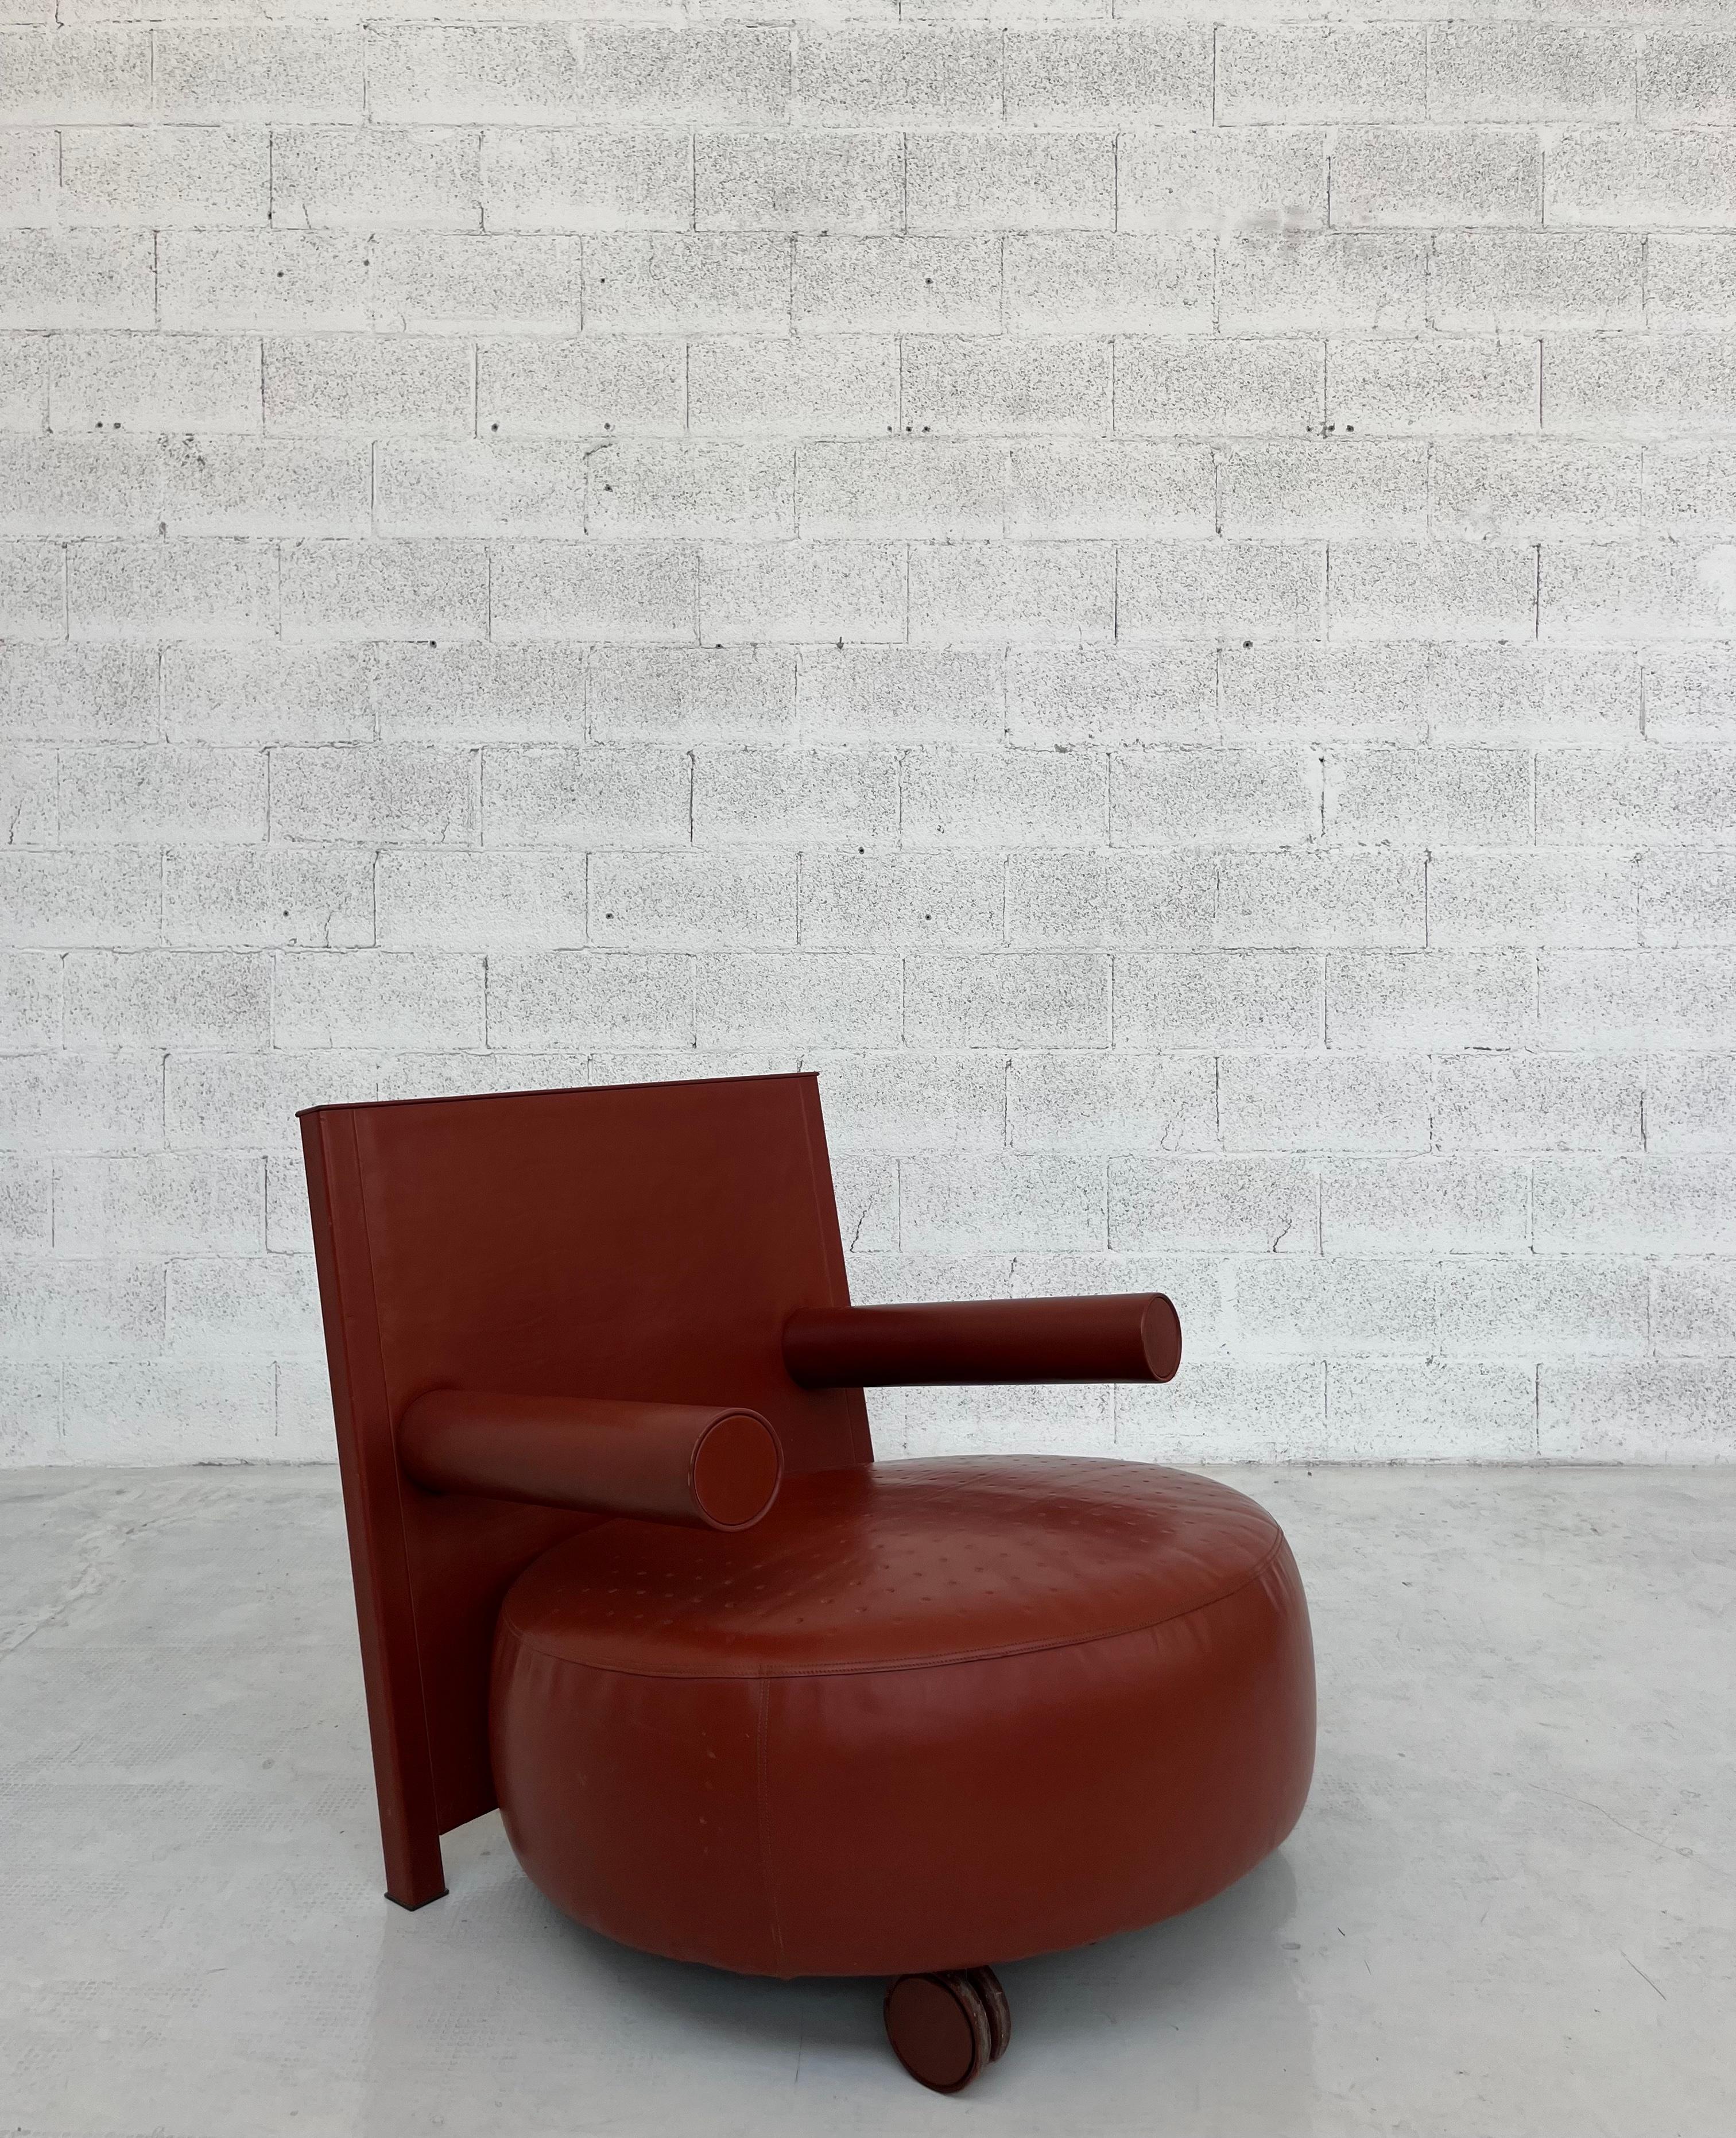 Outstanding leather armchair Baisity model designed by Antonio Citterio at the end of 80s.
Beautiful and comfortabel seating. 
The chair has two wheel upfront so it can easily moved to another position in your room.
Very good condition